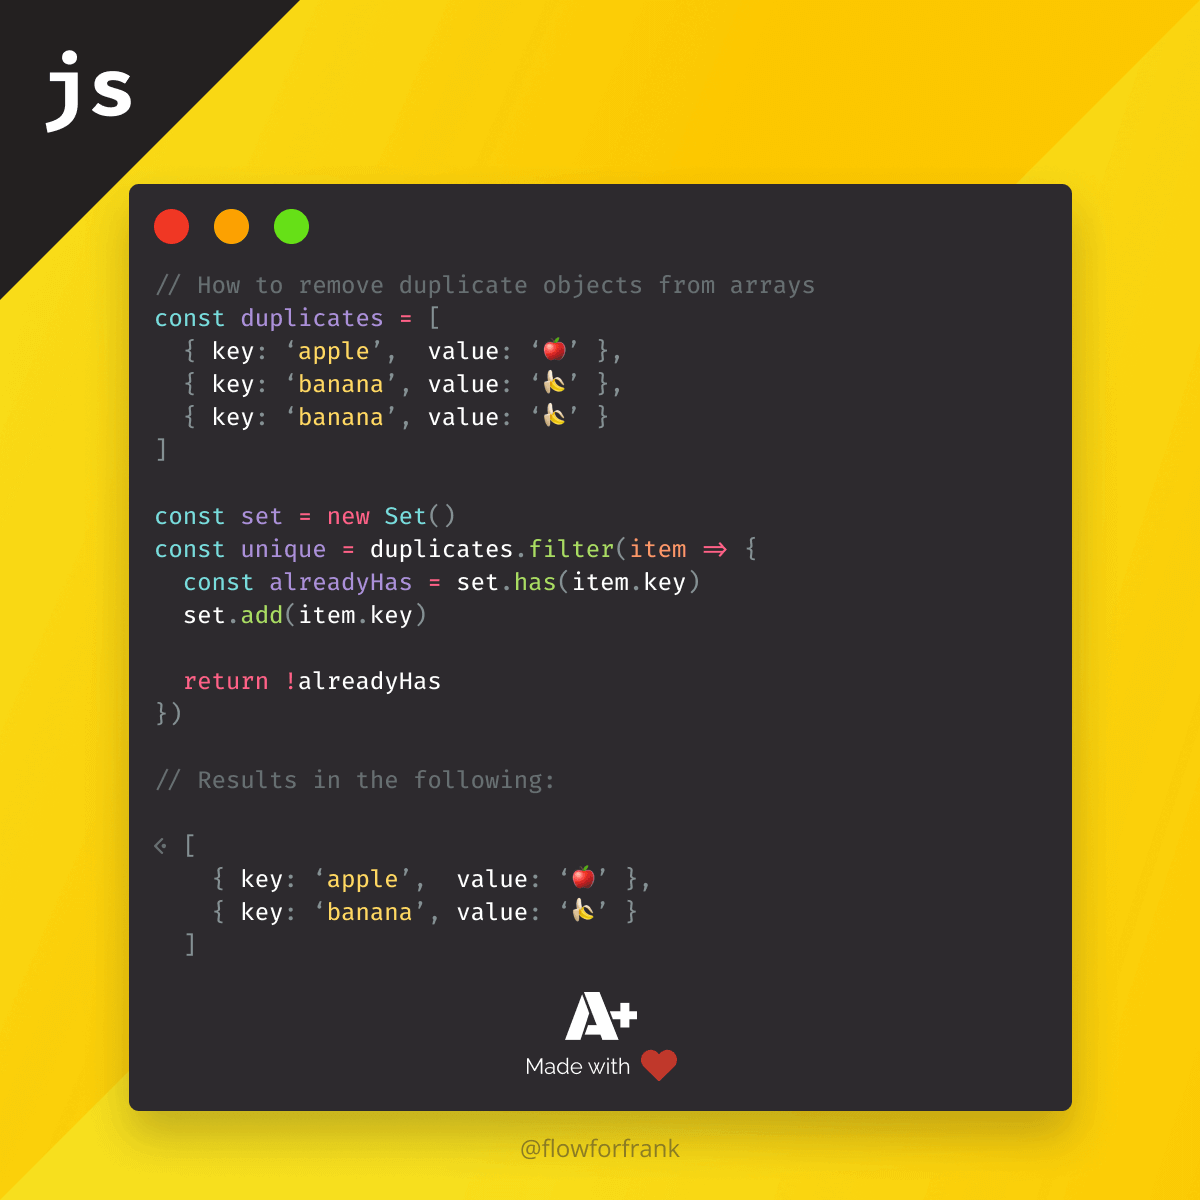 How to Remove Duplicate Objects from Arrays in JavaScript